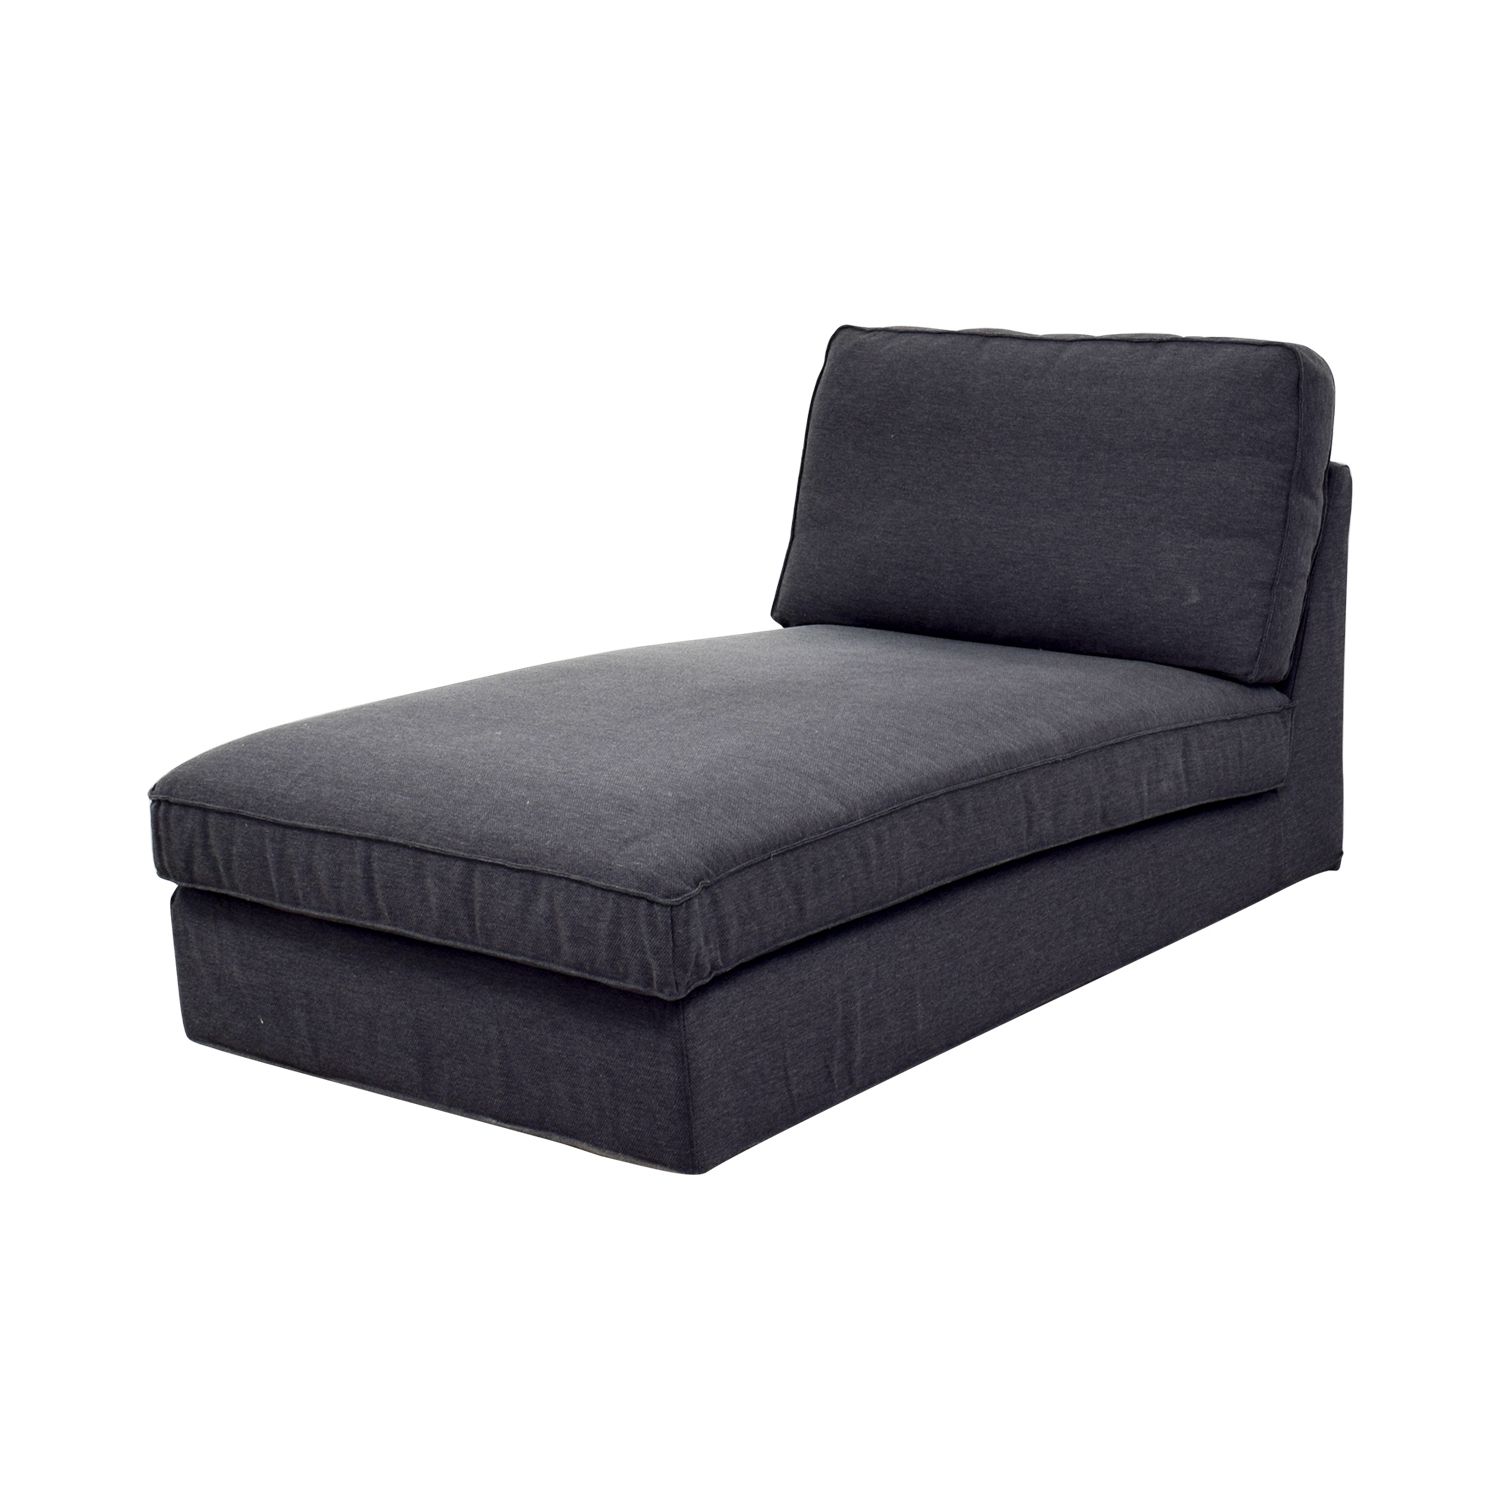 [%86% Off – Pottery Barn Pottery Barn Chaise Lounge / Sofas With Well Liked Pottery Barn Chaise Lounges|Pottery Barn Chaise Lounges With Regard To Well Known 86% Off – Pottery Barn Pottery Barn Chaise Lounge / Sofas|Most Up To Date Pottery Barn Chaise Lounges Regarding 86% Off – Pottery Barn Pottery Barn Chaise Lounge / Sofas|Popular 86% Off – Pottery Barn Pottery Barn Chaise Lounge / Sofas Within Pottery Barn Chaise Lounges%] (View 11 of 15)